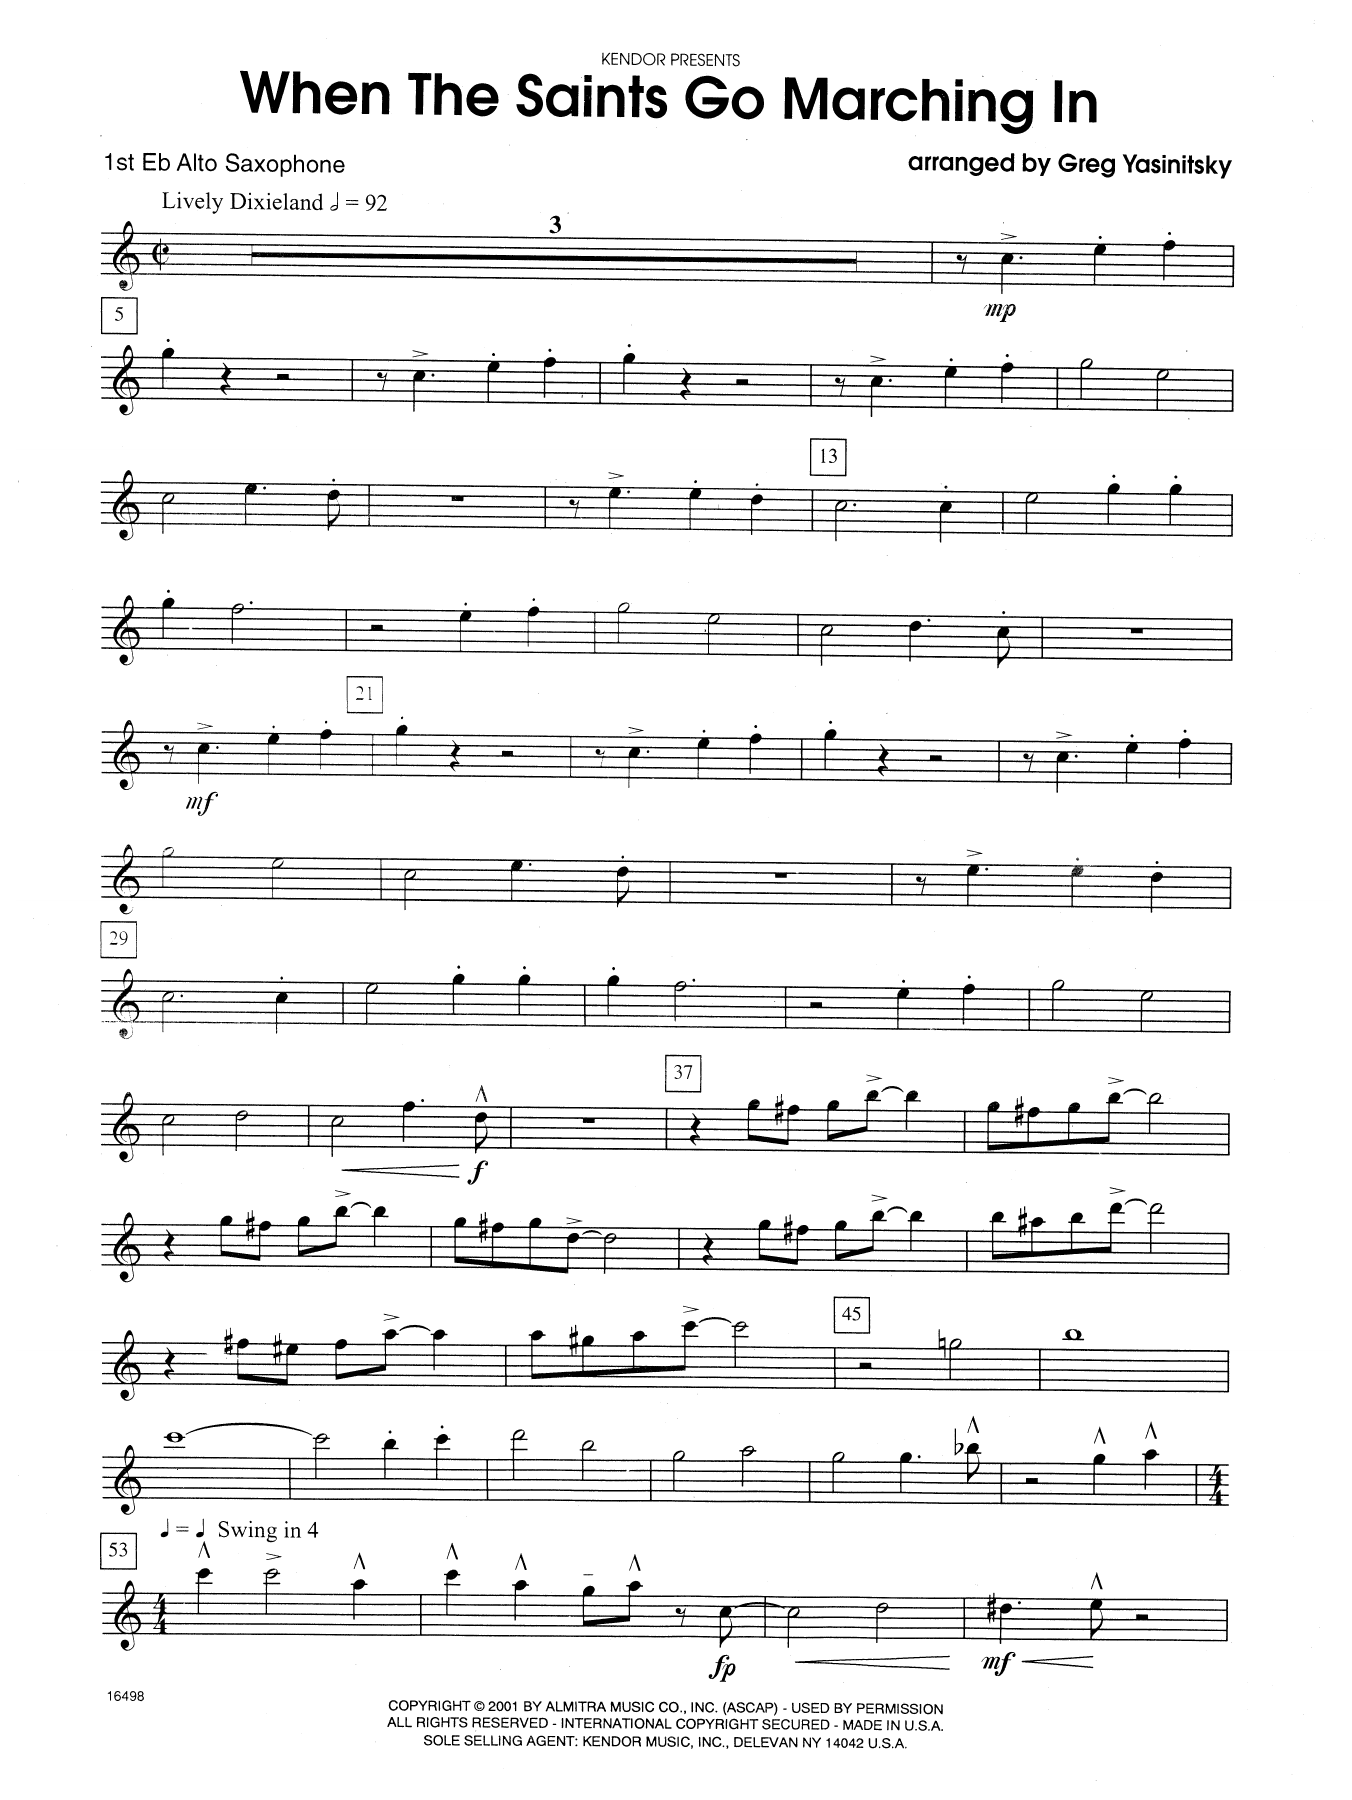 Gregory Yasinitsky When the Saints Go Marching In - 1st Eb Alto Saxophone sheet music notes and chords. Download Printable PDF.